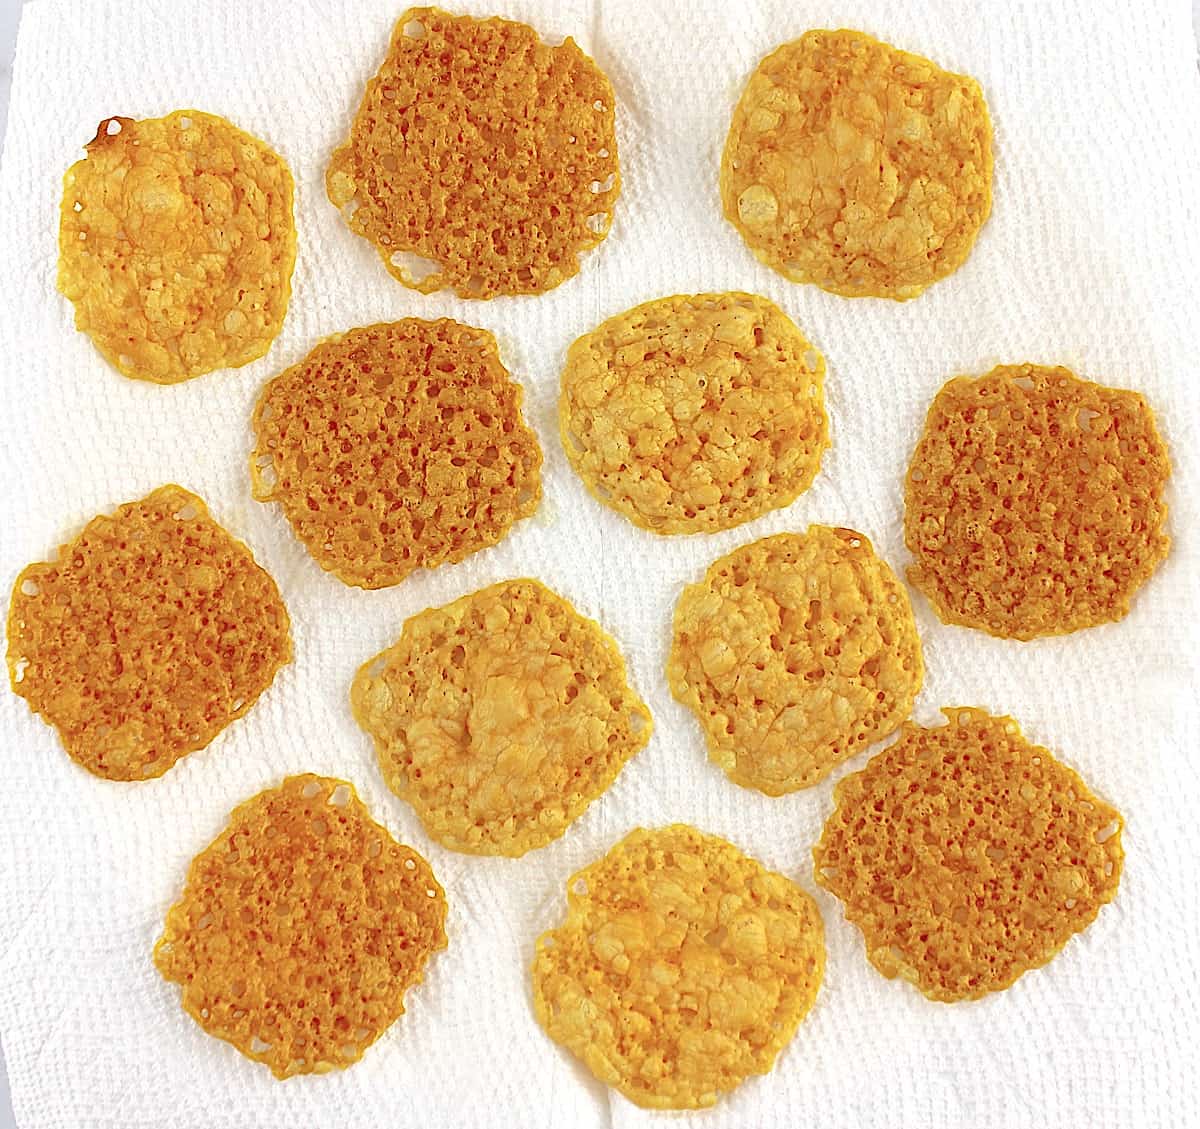 12 Keto Baked Cheese Crisp Crackers on paper towels